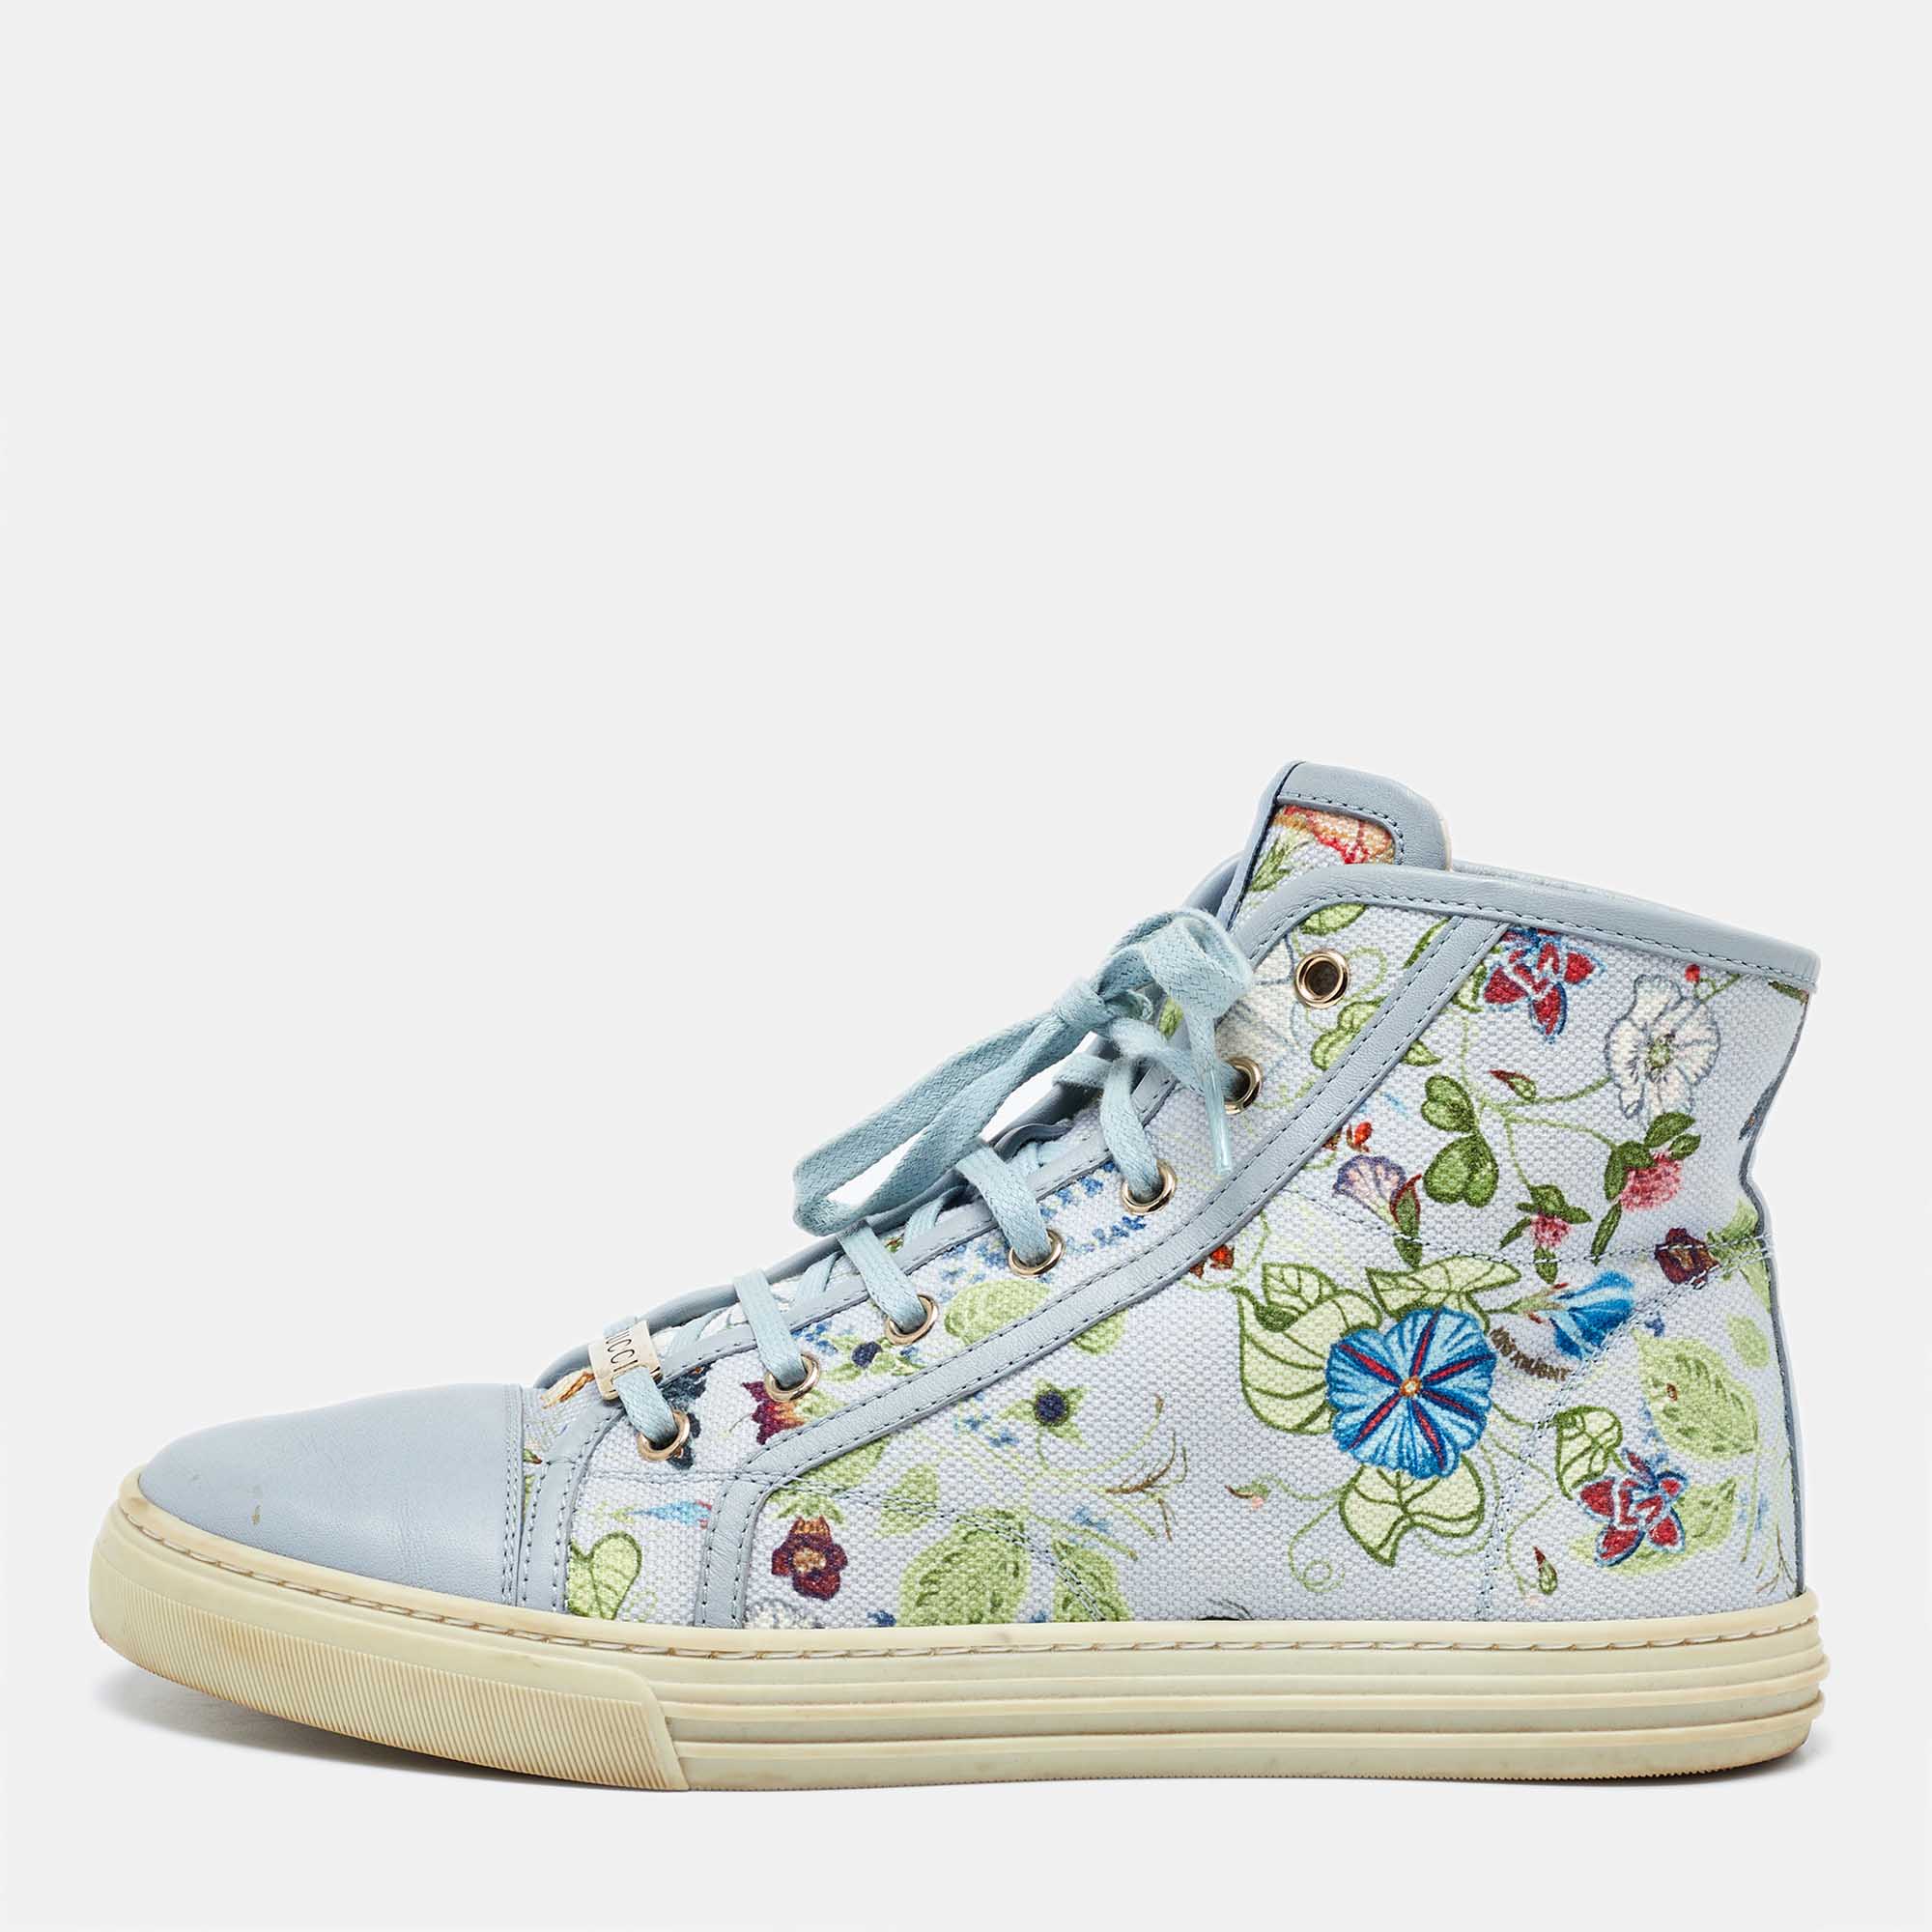 

Gucci Grey Leather and Floral Print Canvas High Top Sneakers Size